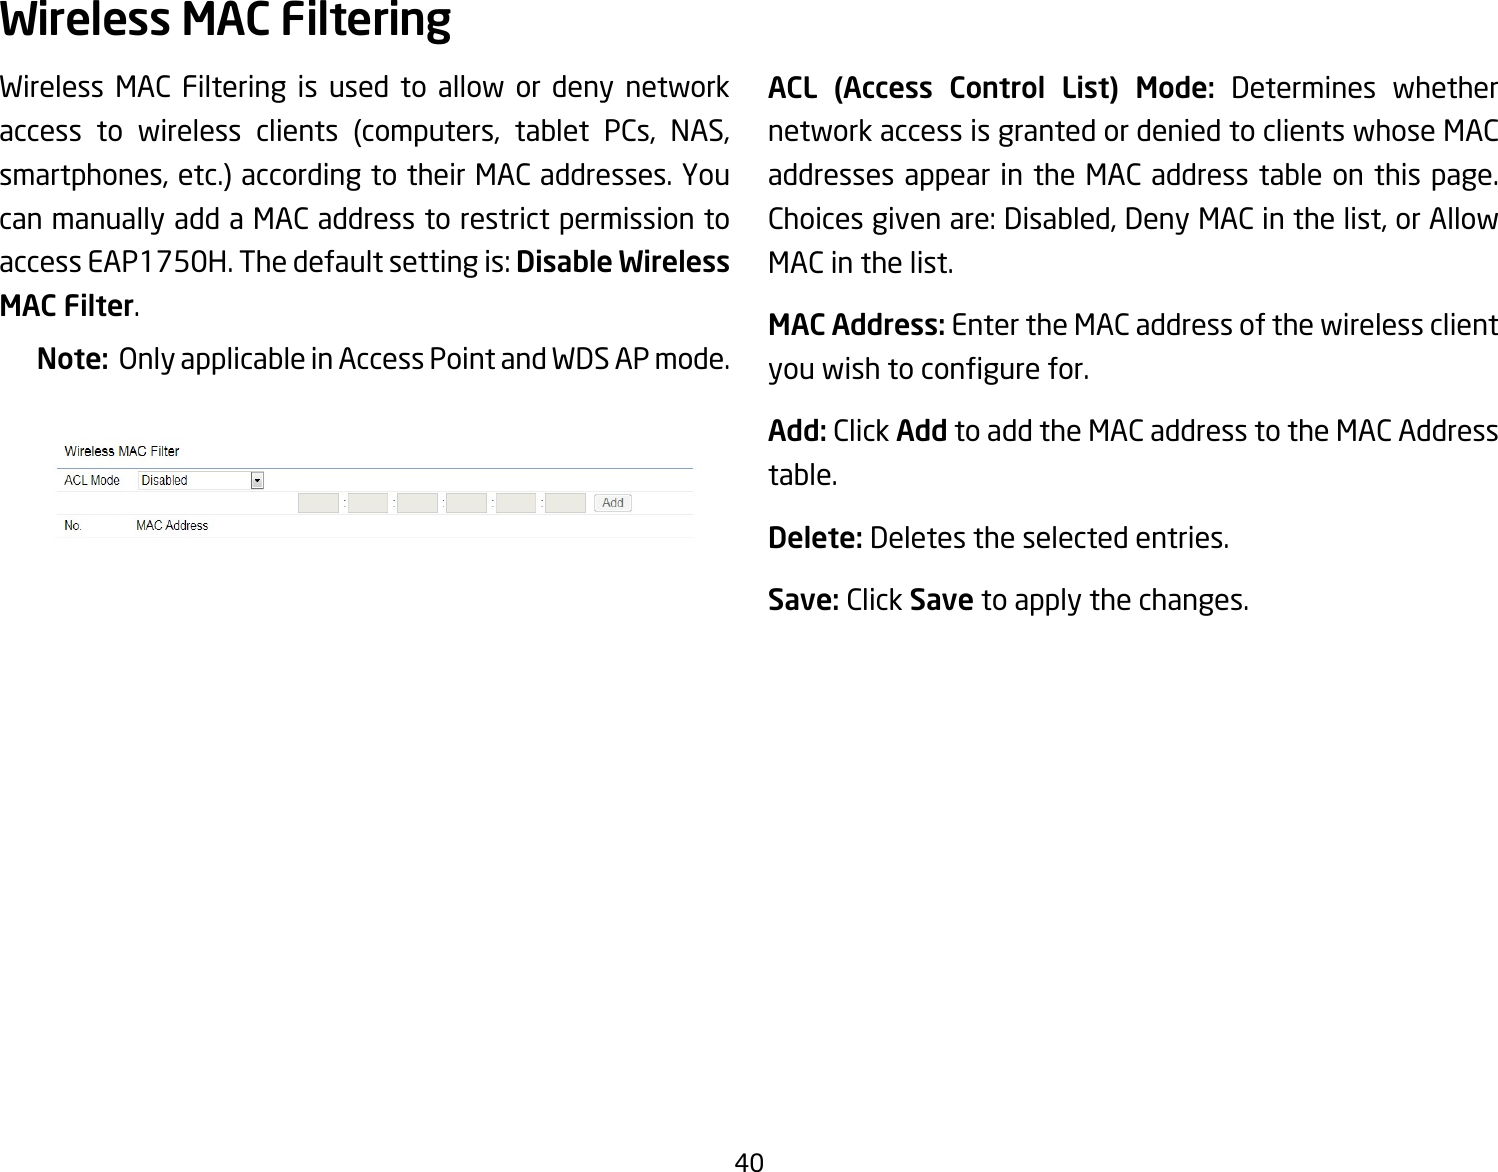 40Wireless MAC Filtering is used to allow or deny network access to wireless clients (computers, tablet PCs, NAS, smartphones, etc.) according to their MAC addresses. You can manually add a MAC address to restrict permission to accessEAP1750H.Thedefaultsettingis:Disable Wireless MAC Filter.Note:  Only applicable in Access Point and WDS AP mode.ACL (Access Control List) Mode: Determines whether network access is granted or denied to clients whose MAC addresses appear in the MAC address table on this page. Choicesgivenare:Disabled,DenyMACinthelist,orAllowMAC in the list.MAC Address: Enter the MAC address of the wireless client youwishtocongurefor.Add: Click Add to add the MAC address to the MAC Address table.Delete: Deletes the selected entries.Save: Click Save to apply the changes.Wireless MAC Filtering